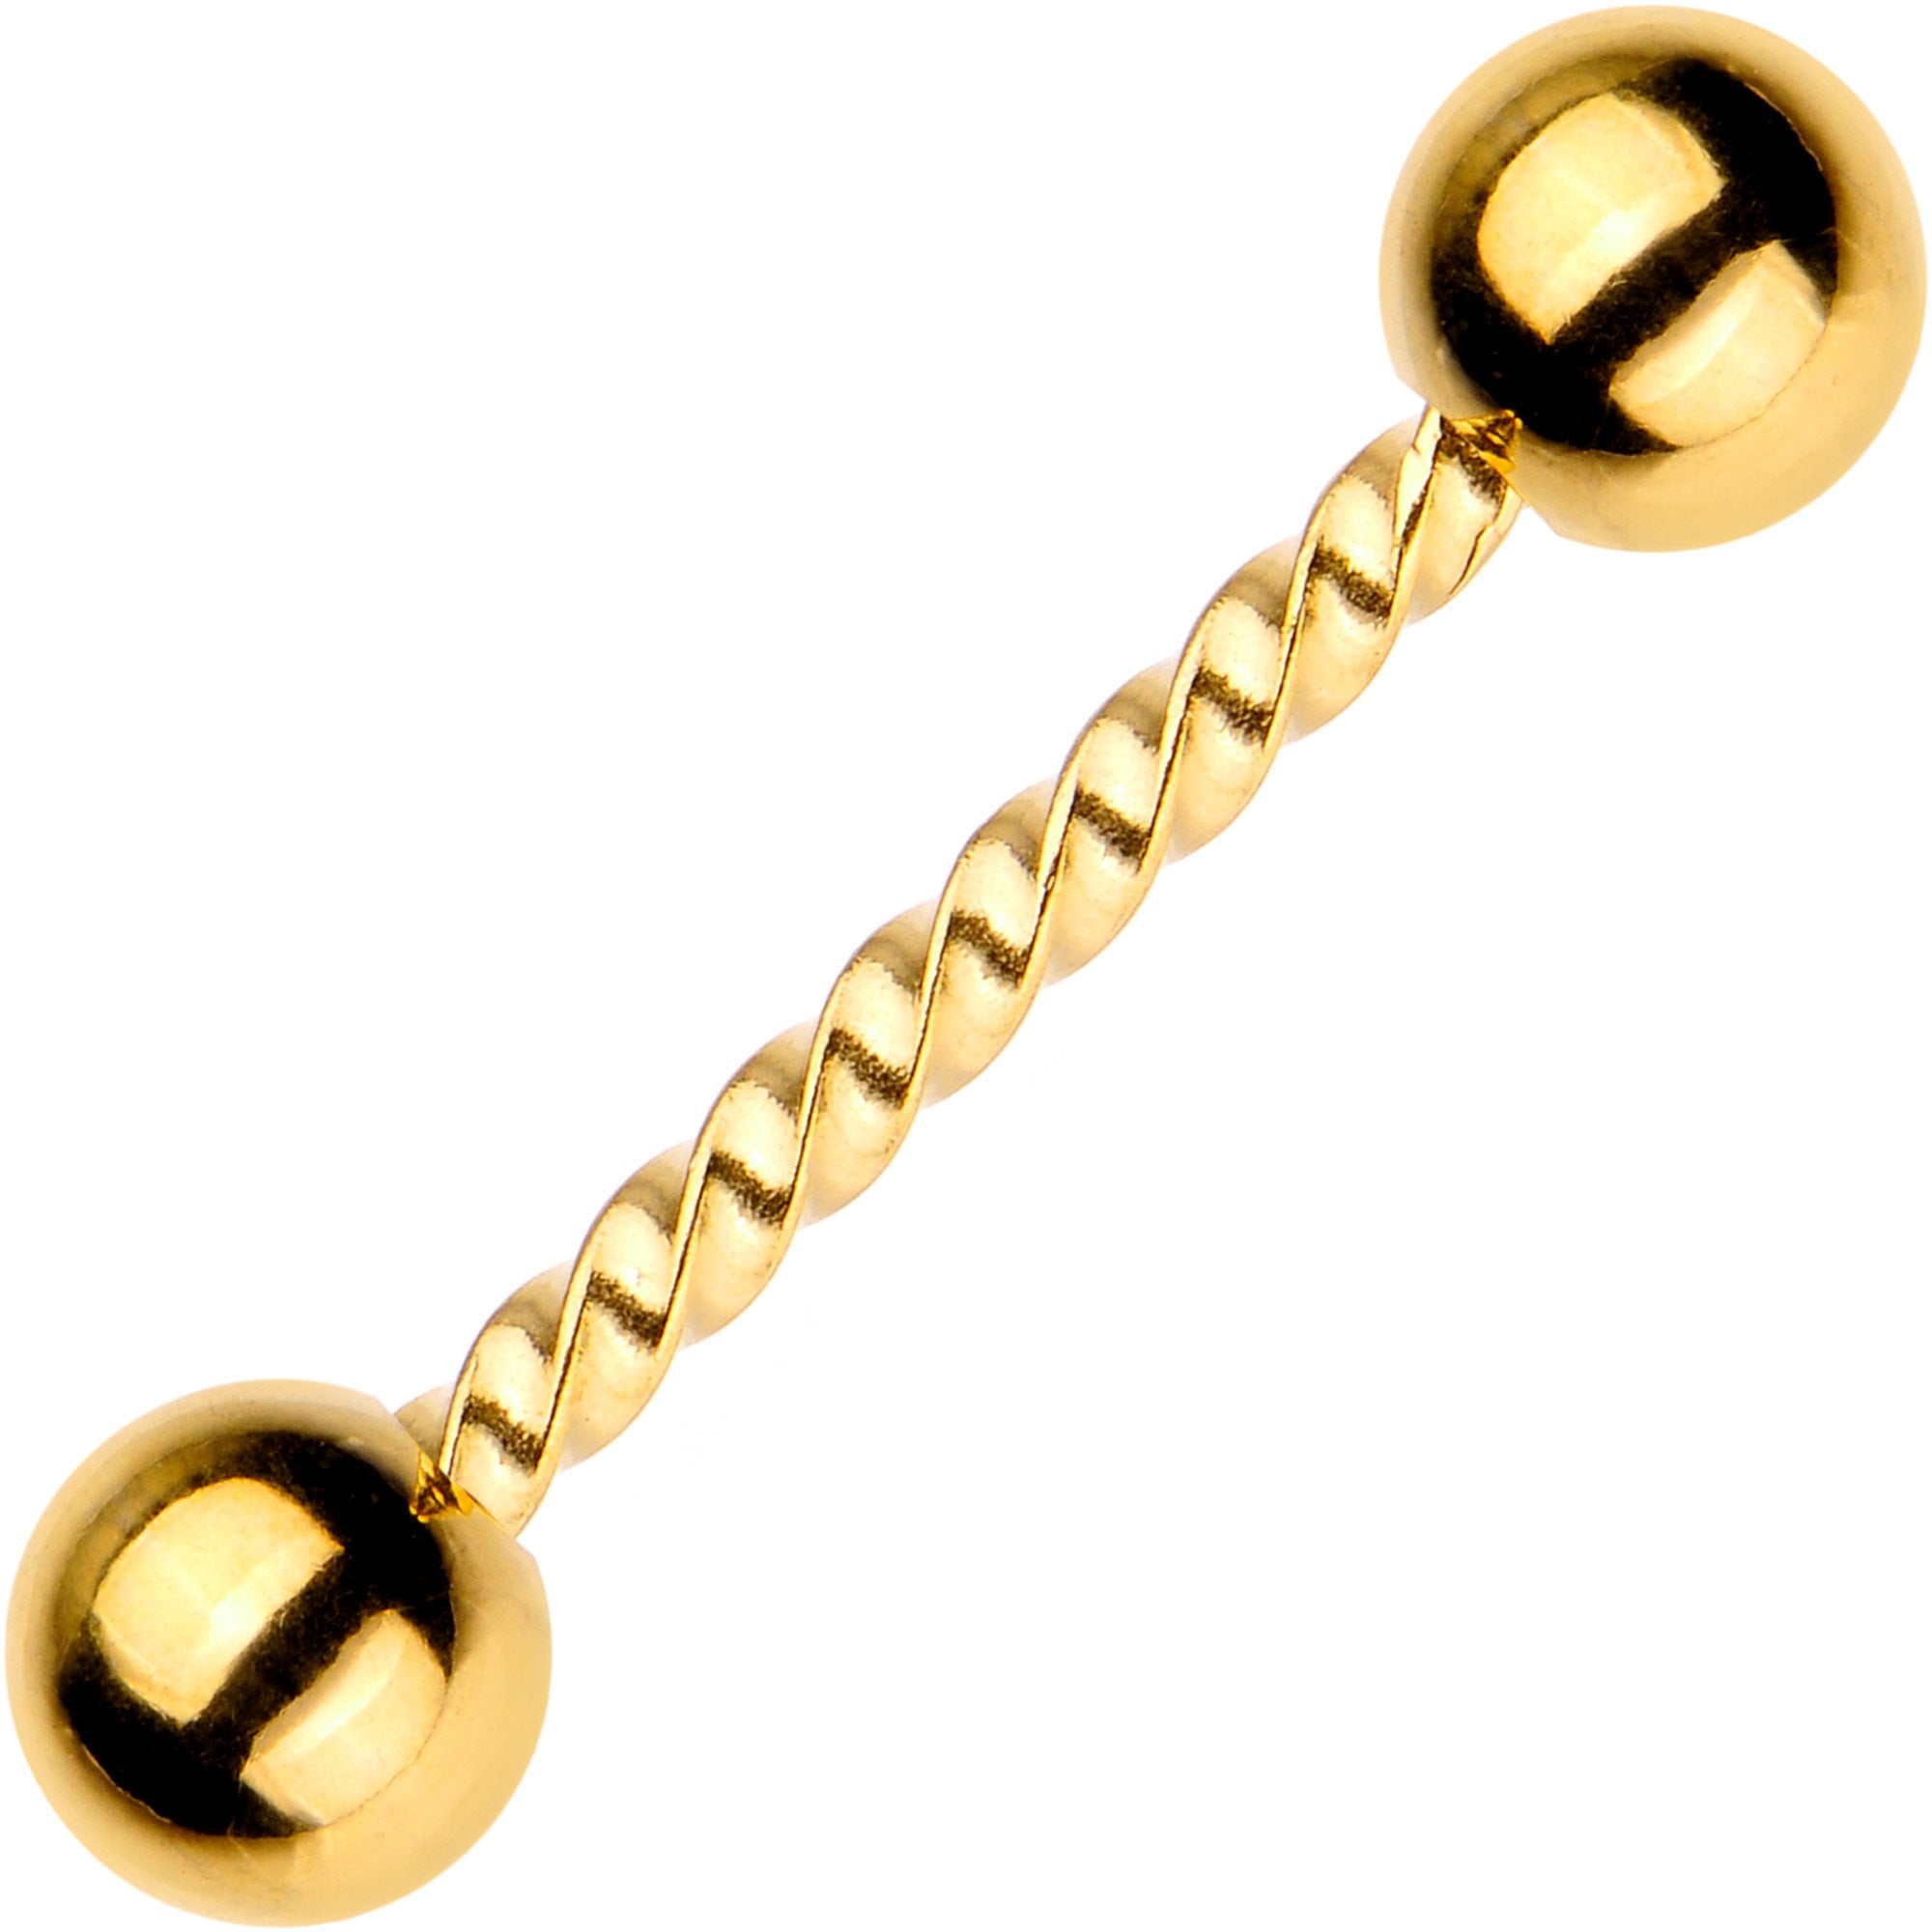 14 Gauge 5/8 Gold Tone IP Seriously Twisted Barbell Tongue Ring